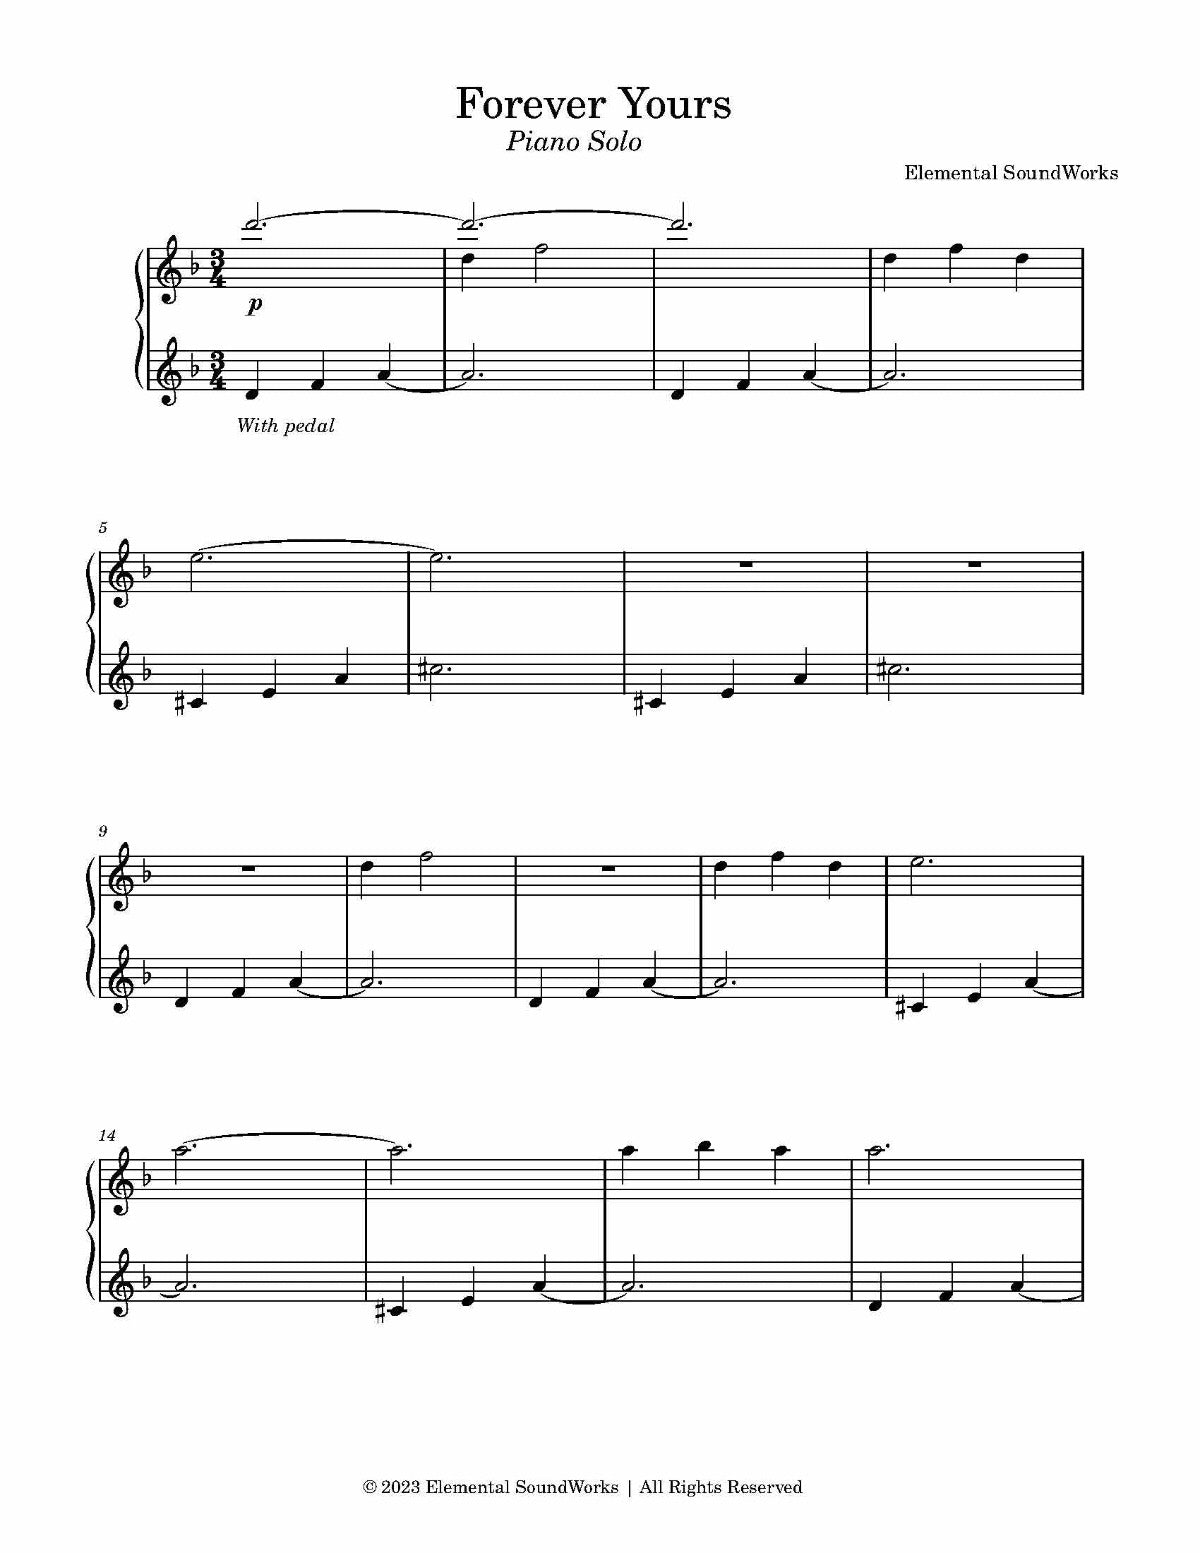 Forever yours - Avicii Sheet music for Piano (Solo)